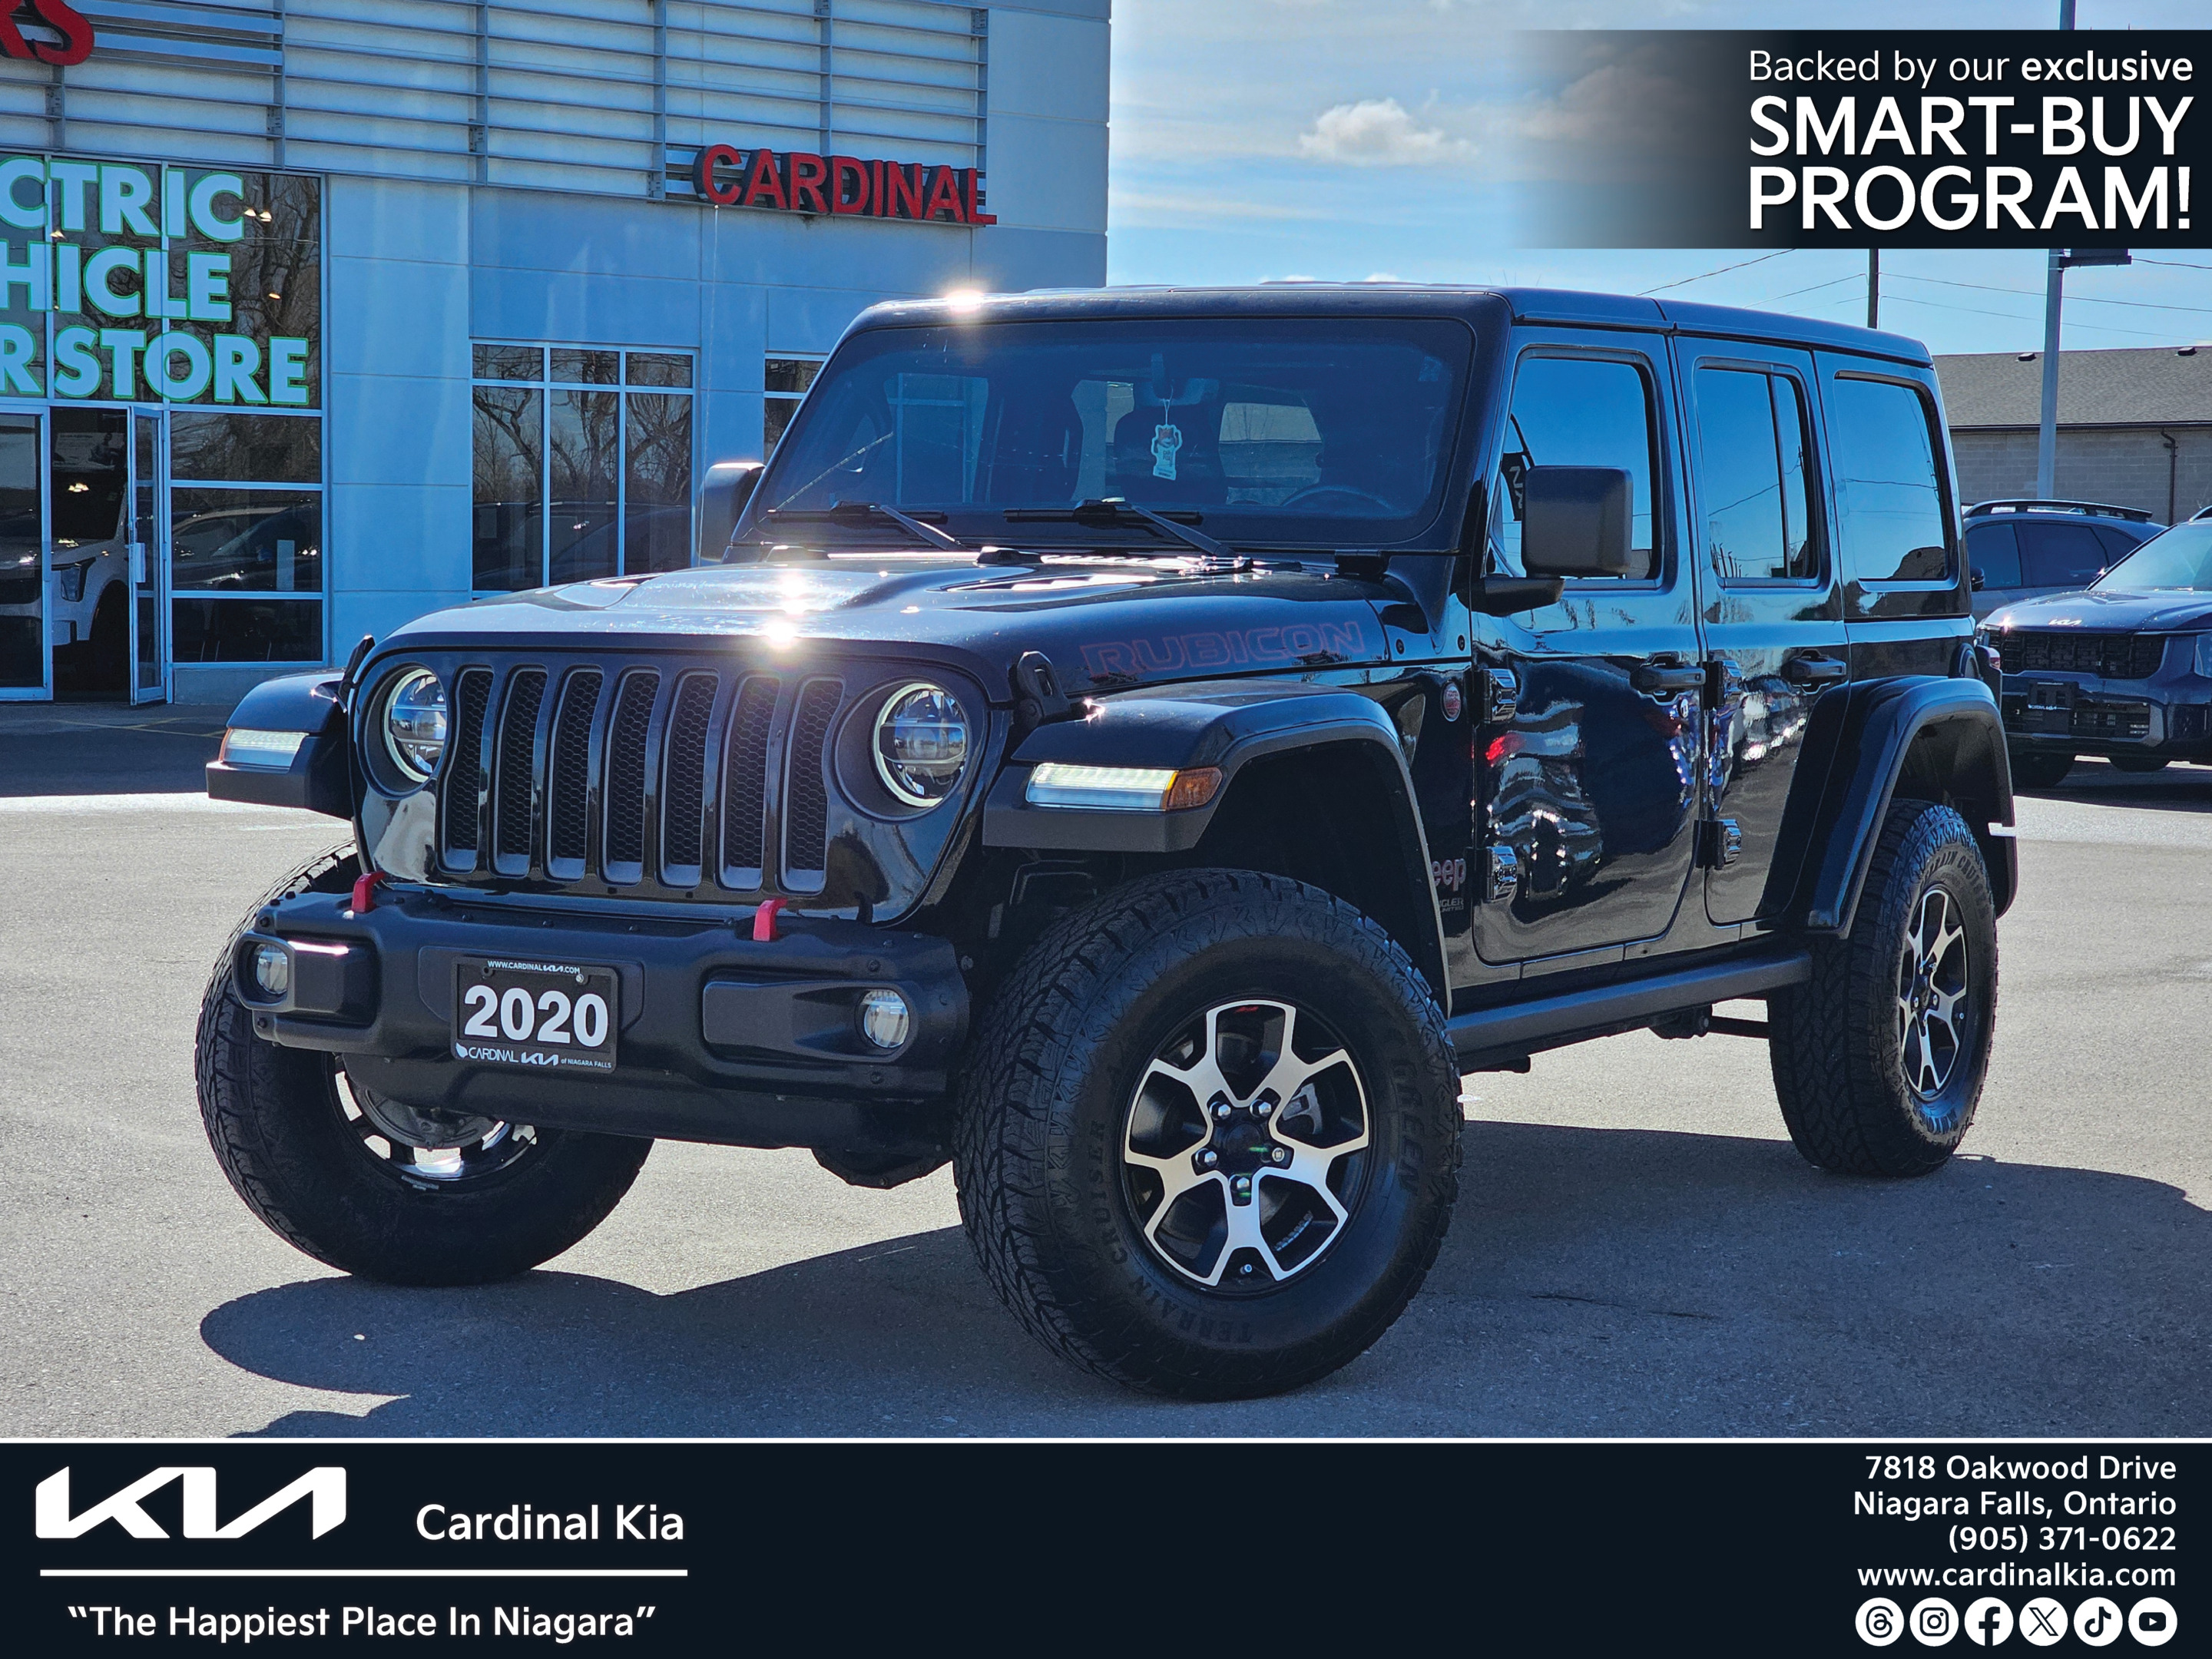 2020 Jeep WRANGLER UNLIMITED Unlimited Rubicon, 4X4, Navi, Heated Seats